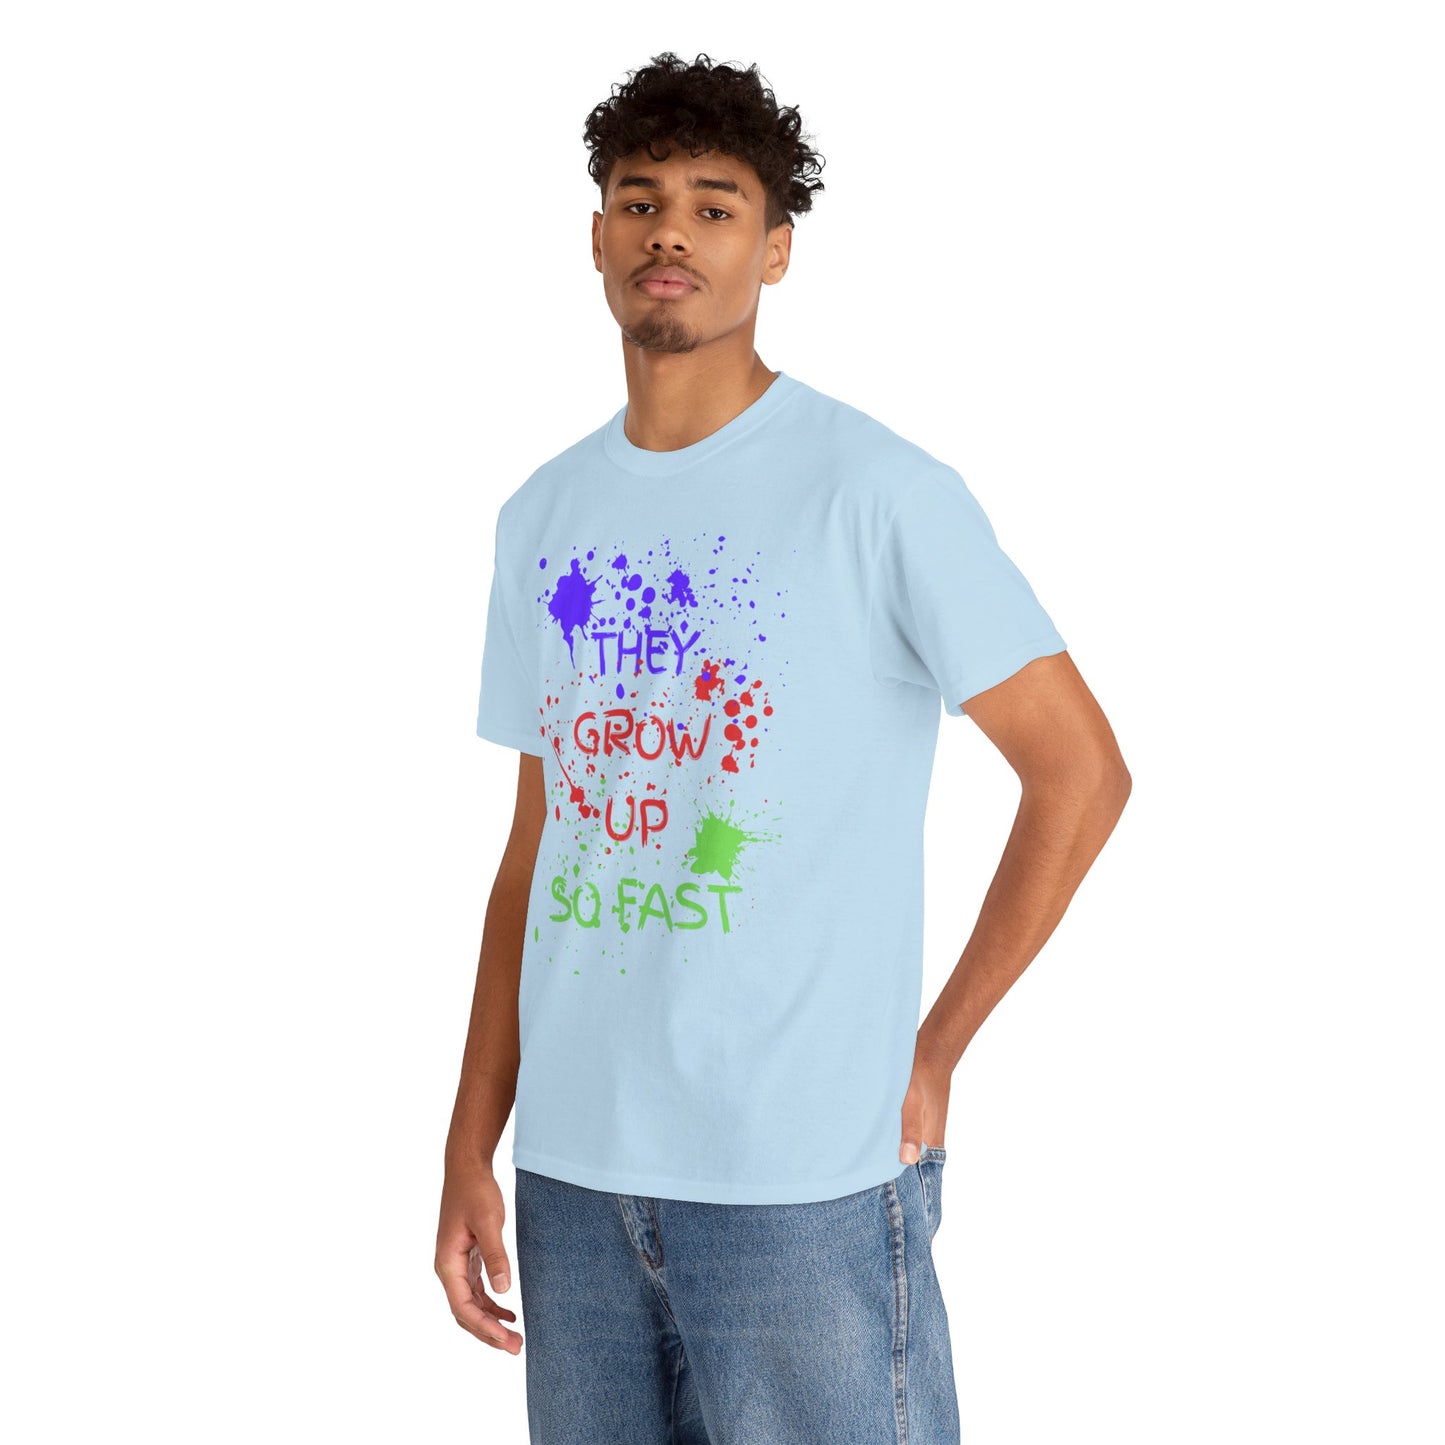 They Grow Up So Fast - Adult Unisex Cotton Tee